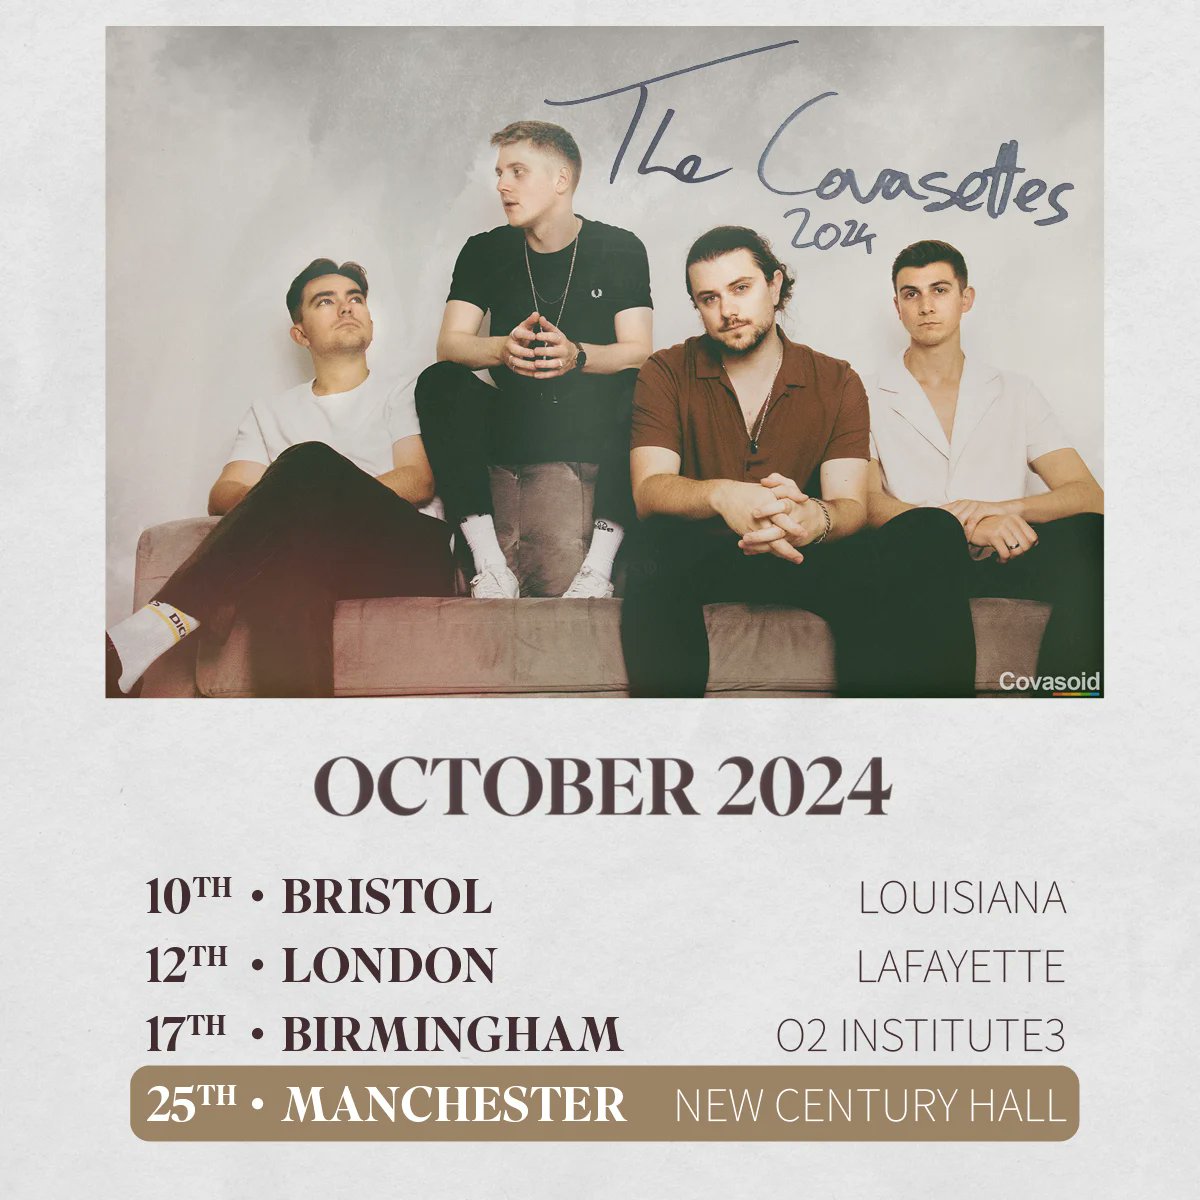 Billets The Covasettes (Manchester New Century Hall - Manchester)